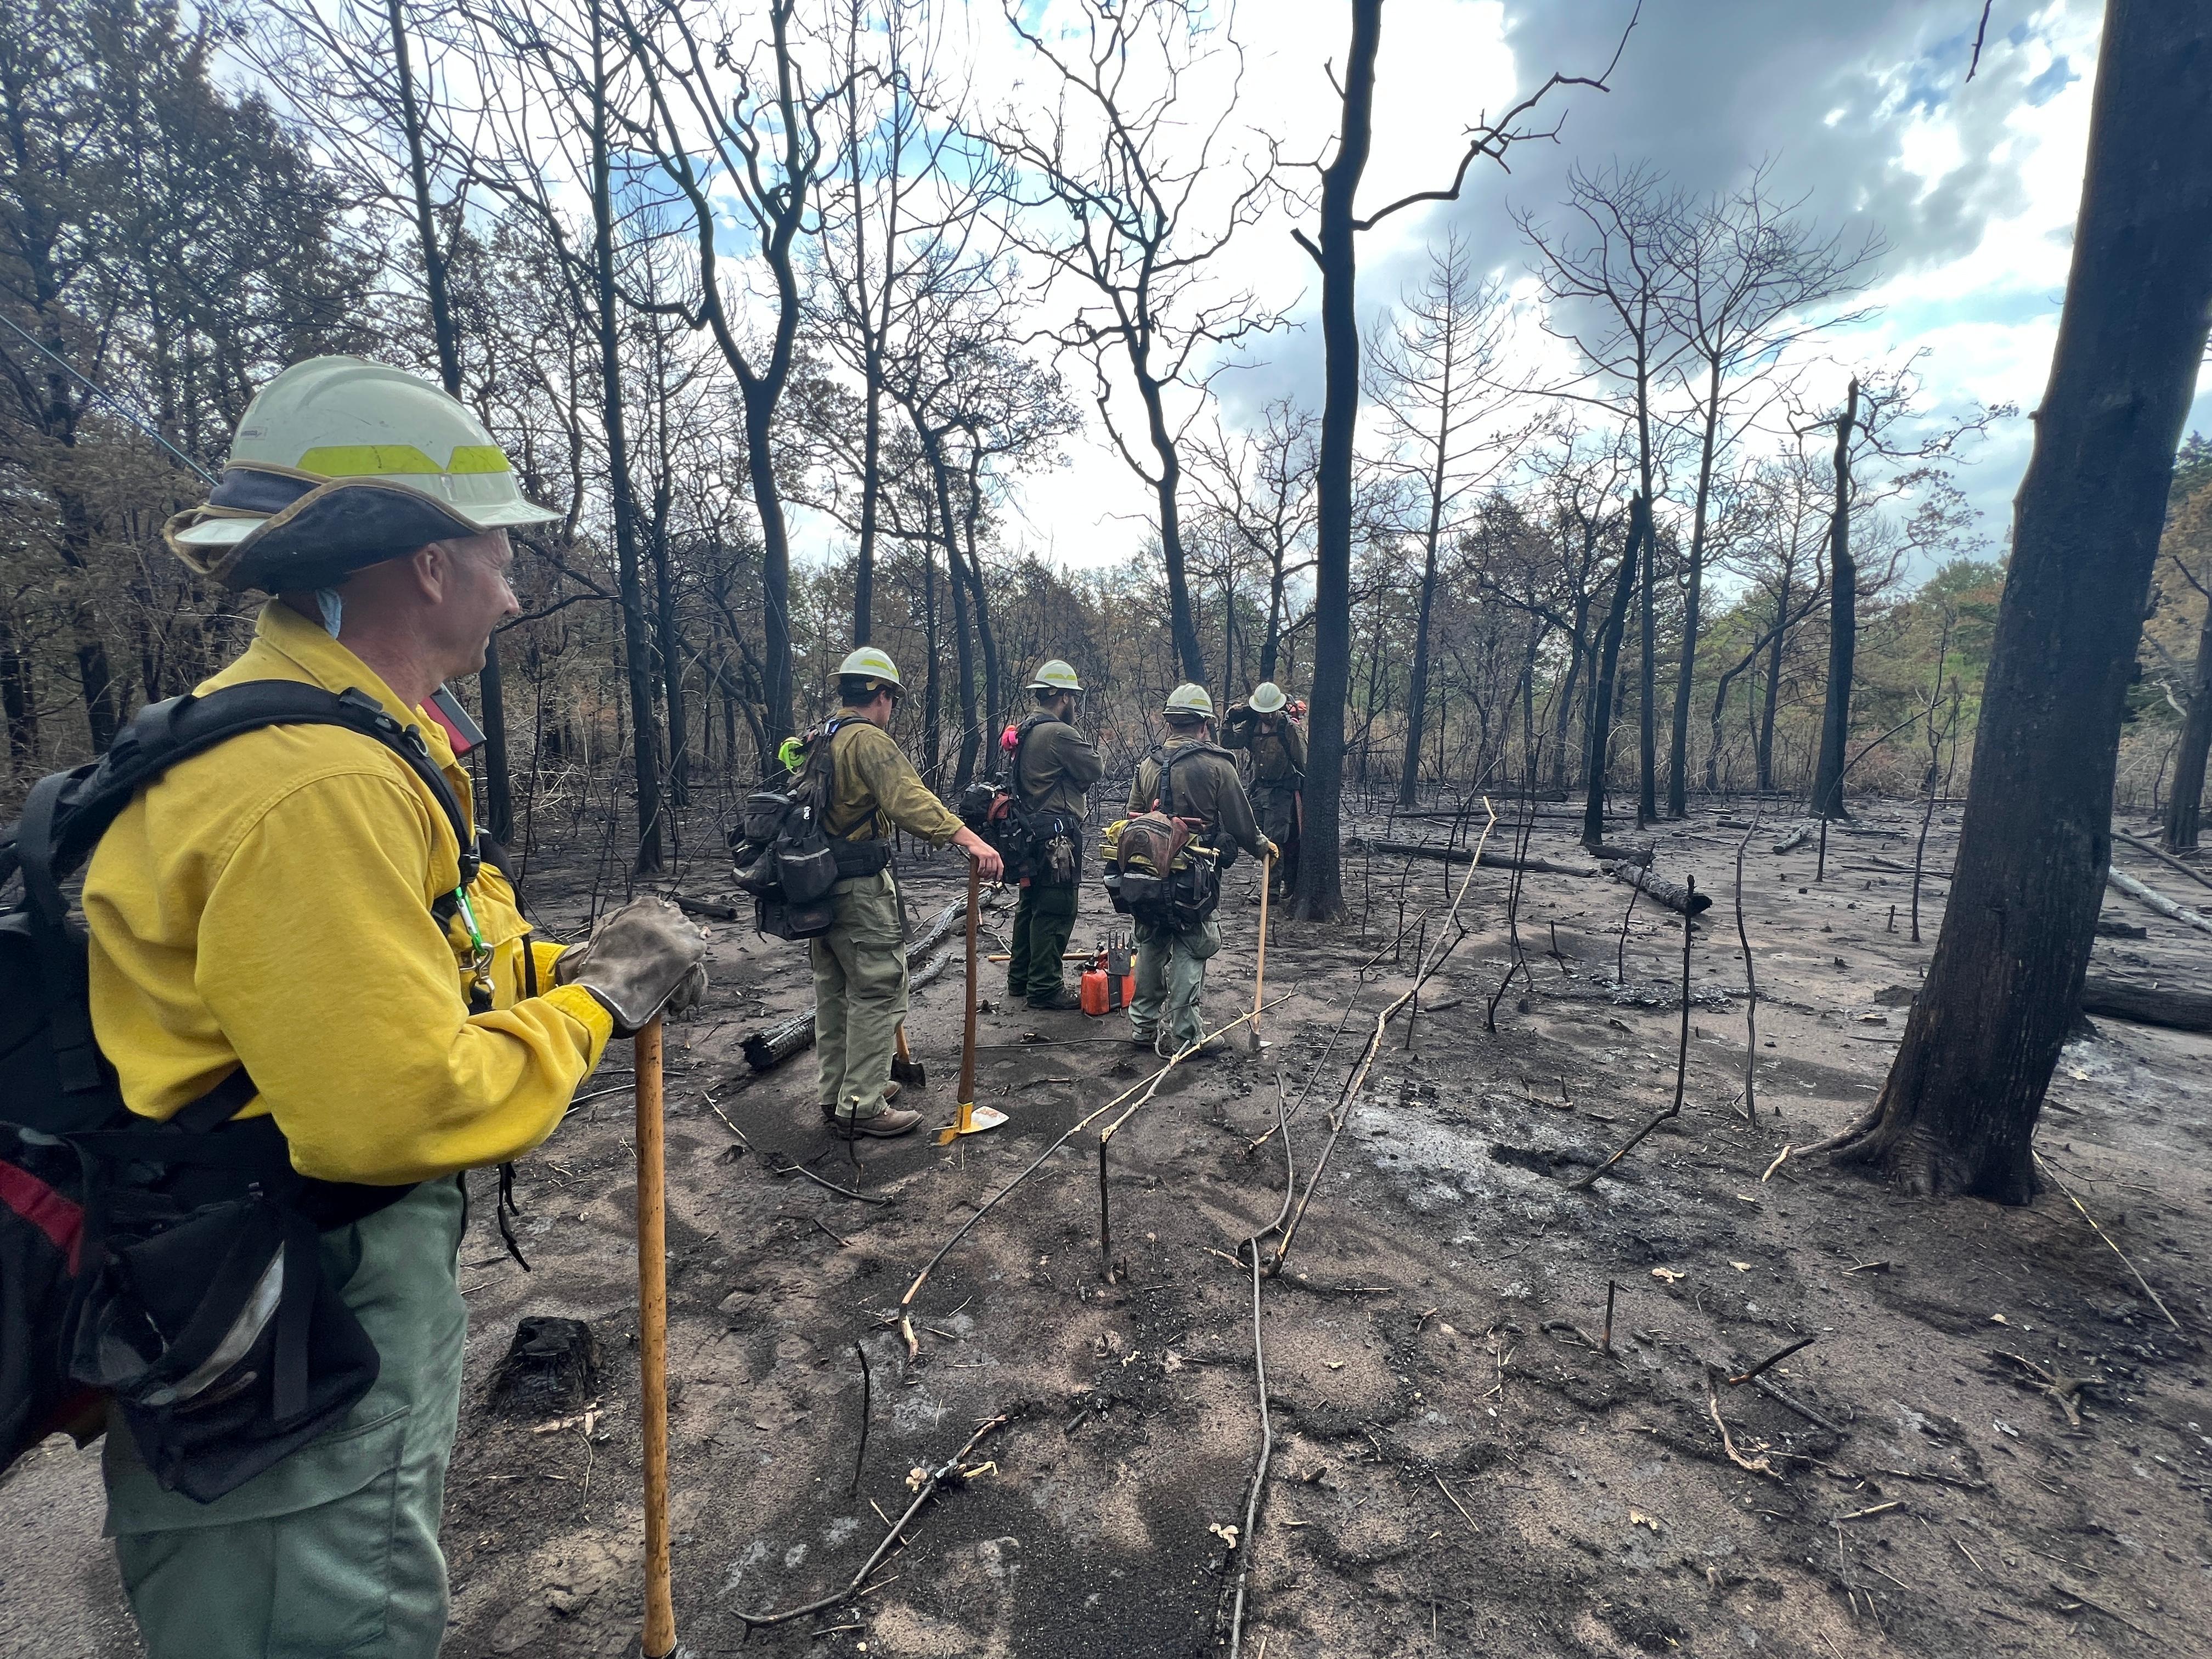 Multiple firefighters stand in an area that experienced  extreme heat. Ground and trees are burned black with cloudy blue sky in background.